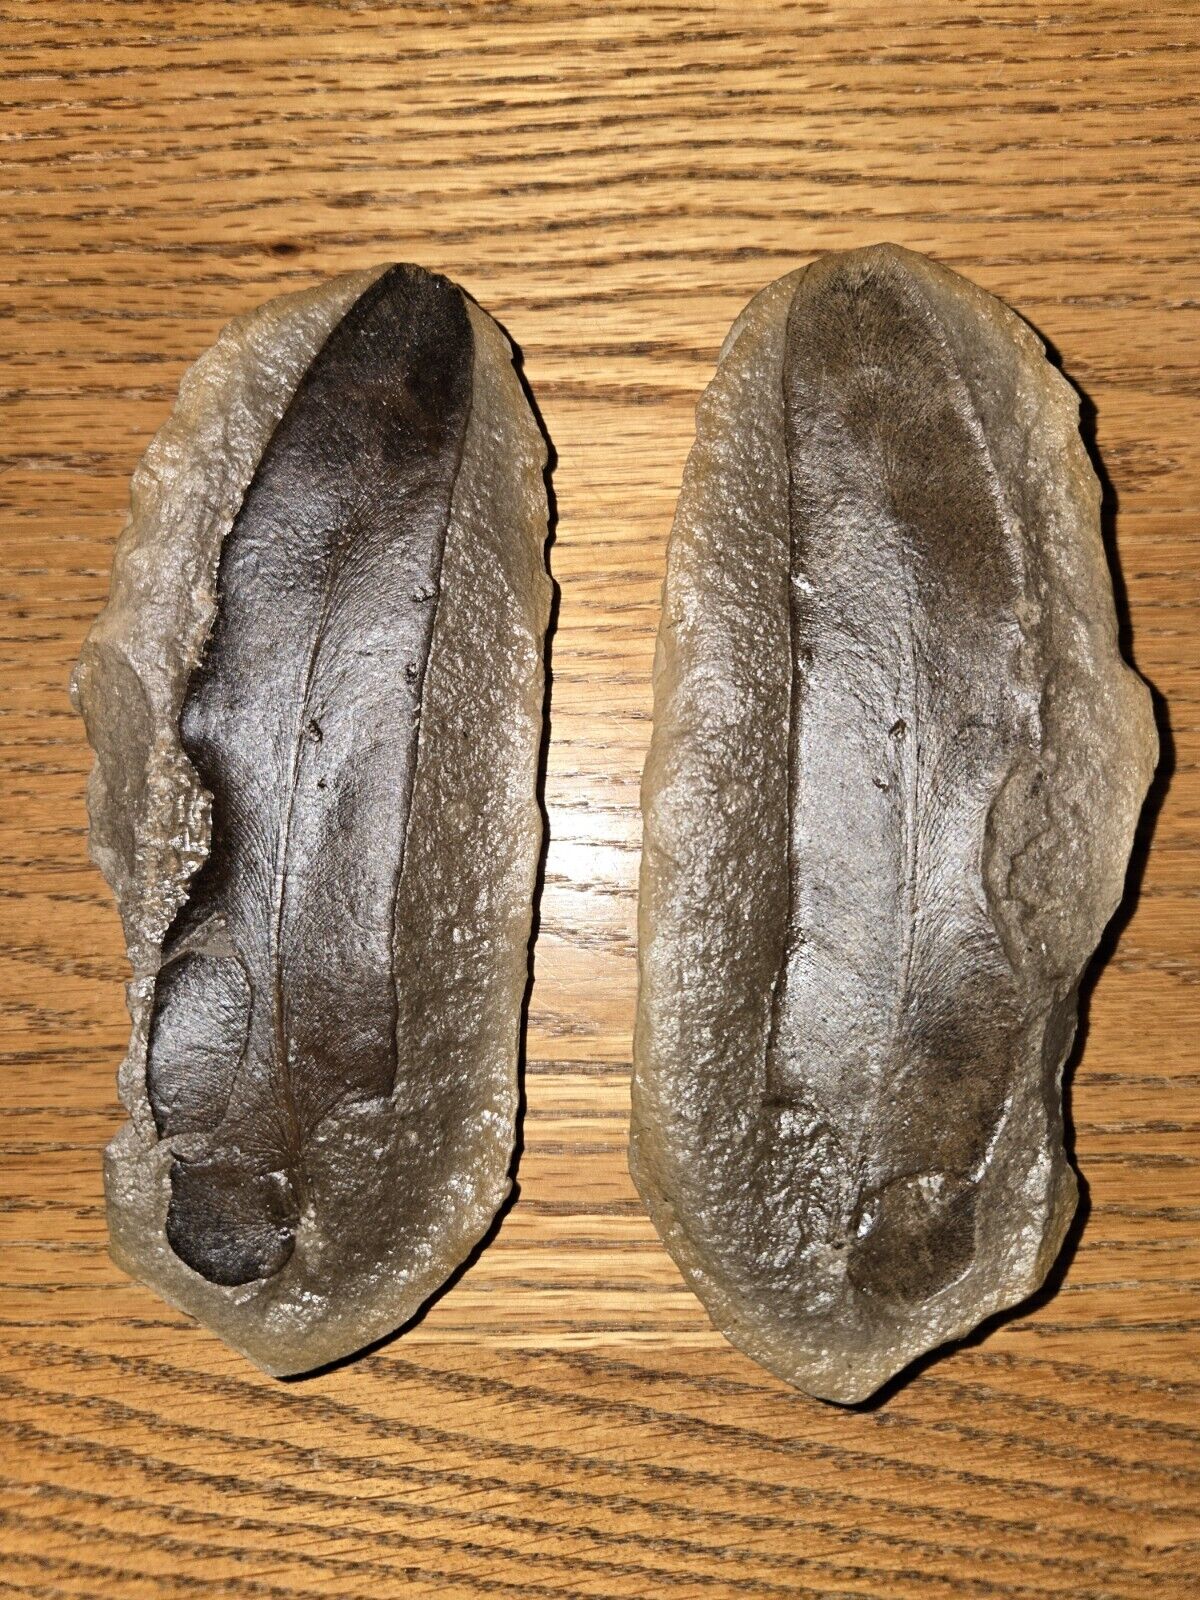 Concretion Fossil  - Leaf/Feather, Mazon Creek